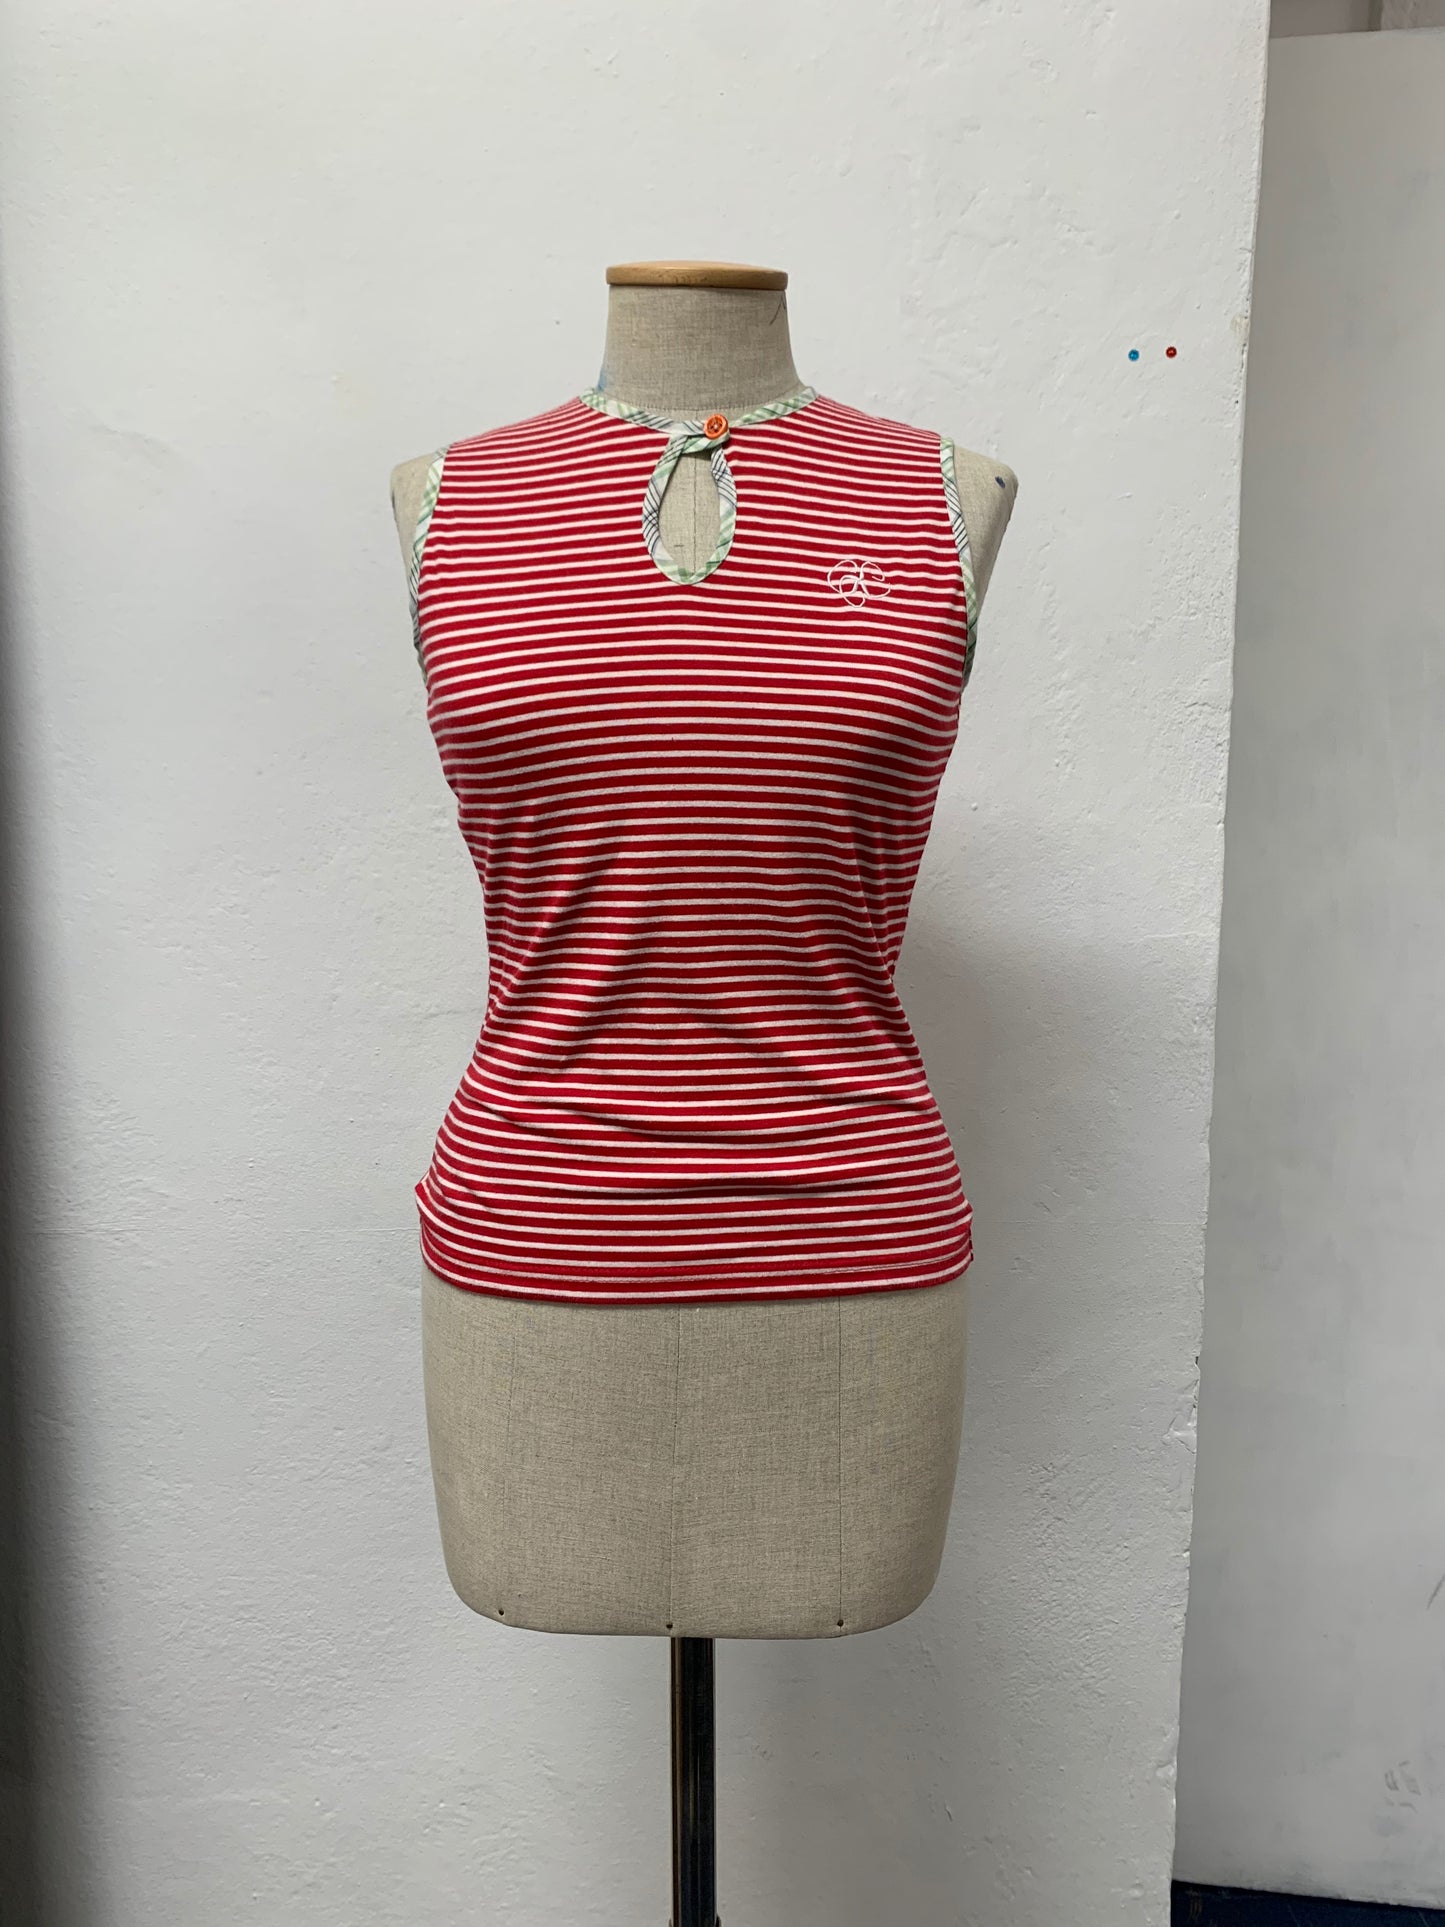 SLEEVE LESS POLO/RED STRIPES
(ready to ship)